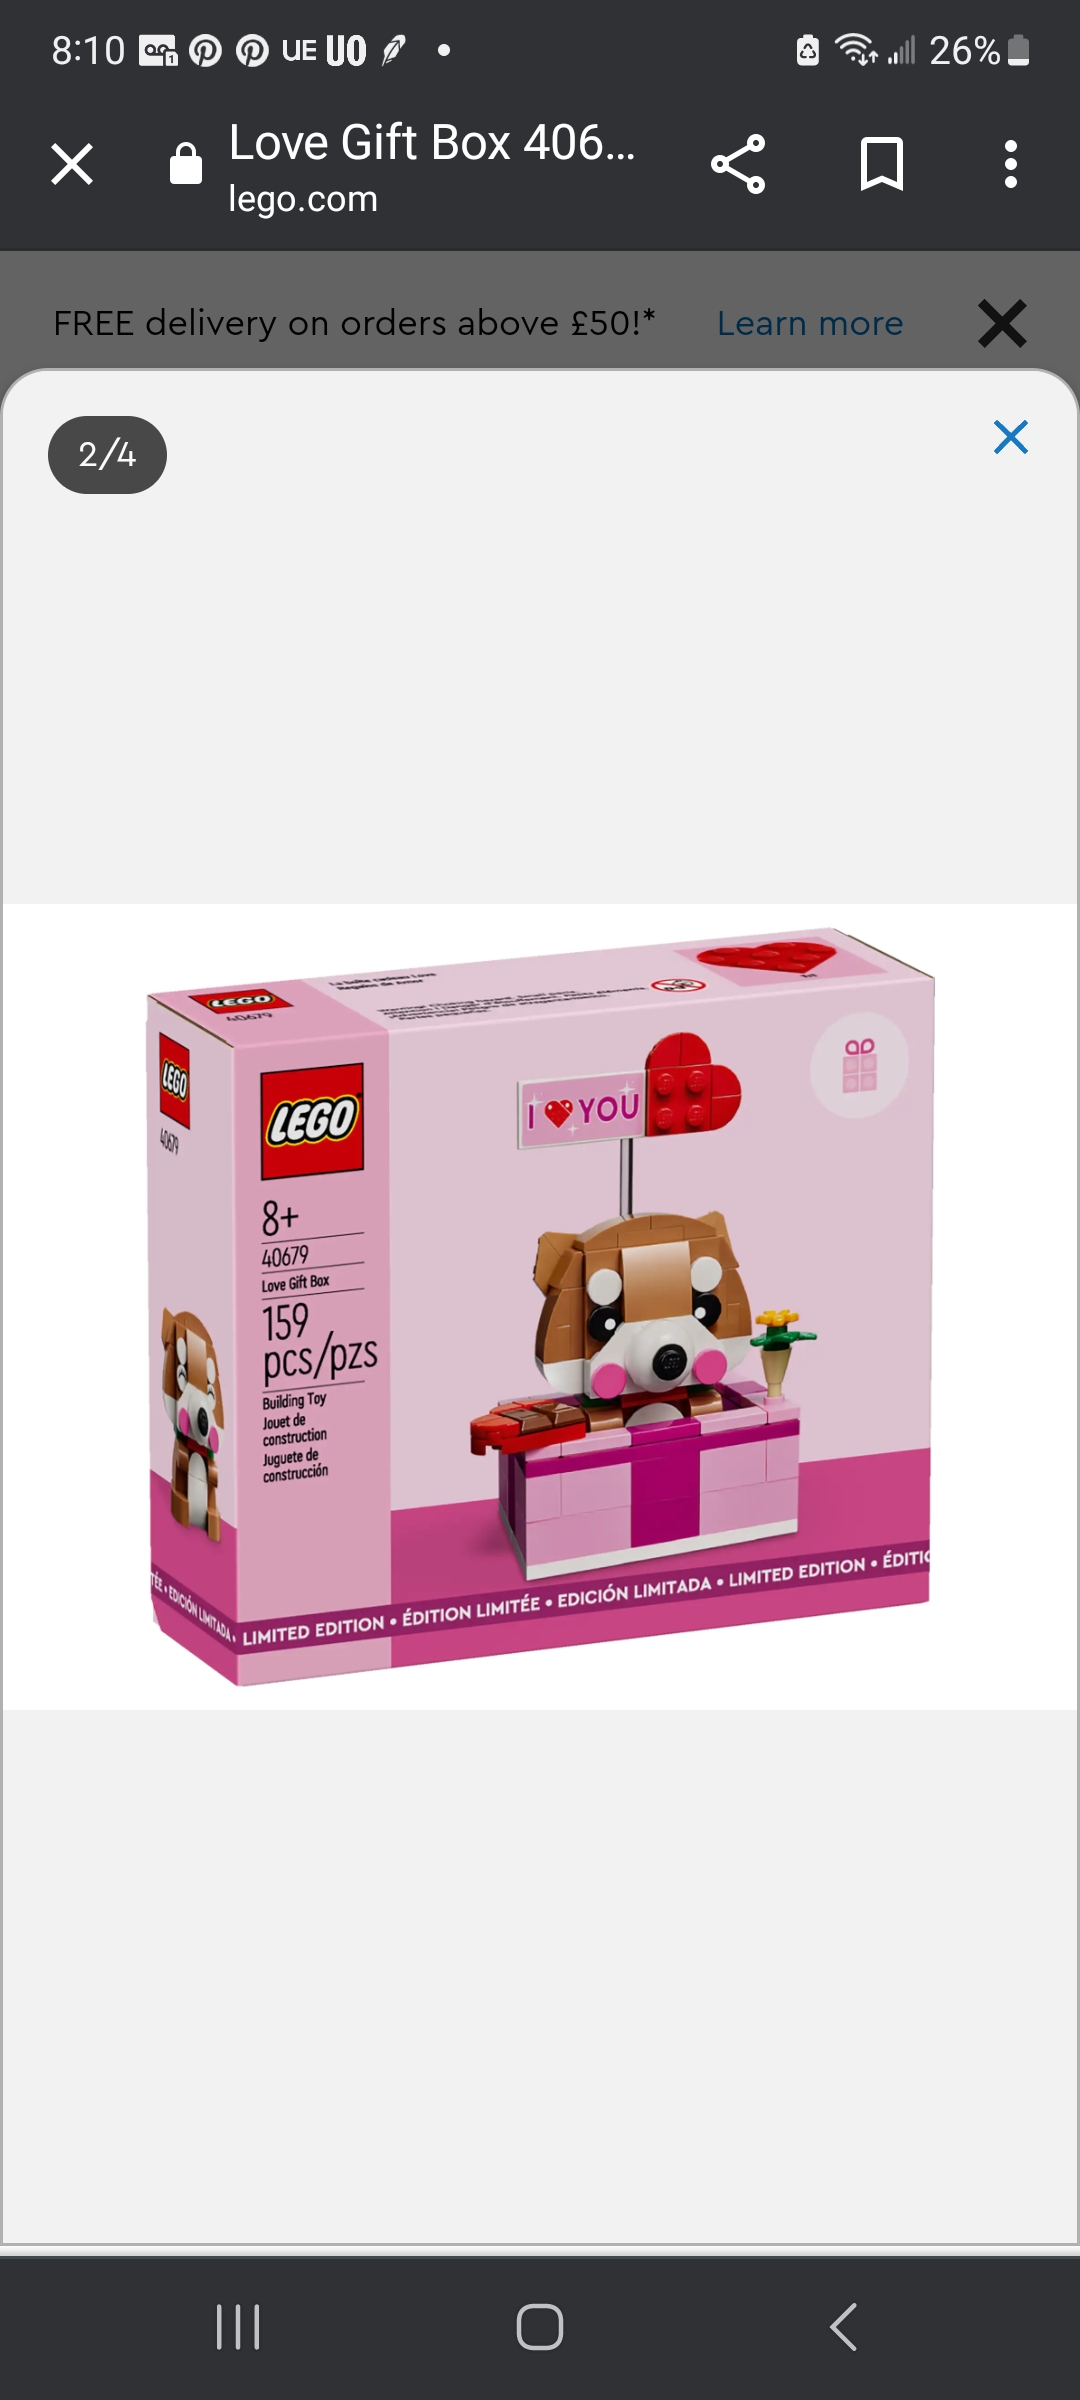 Love Gift Box 40679 | Other | Buy online at the Official LEGO® Shop GB